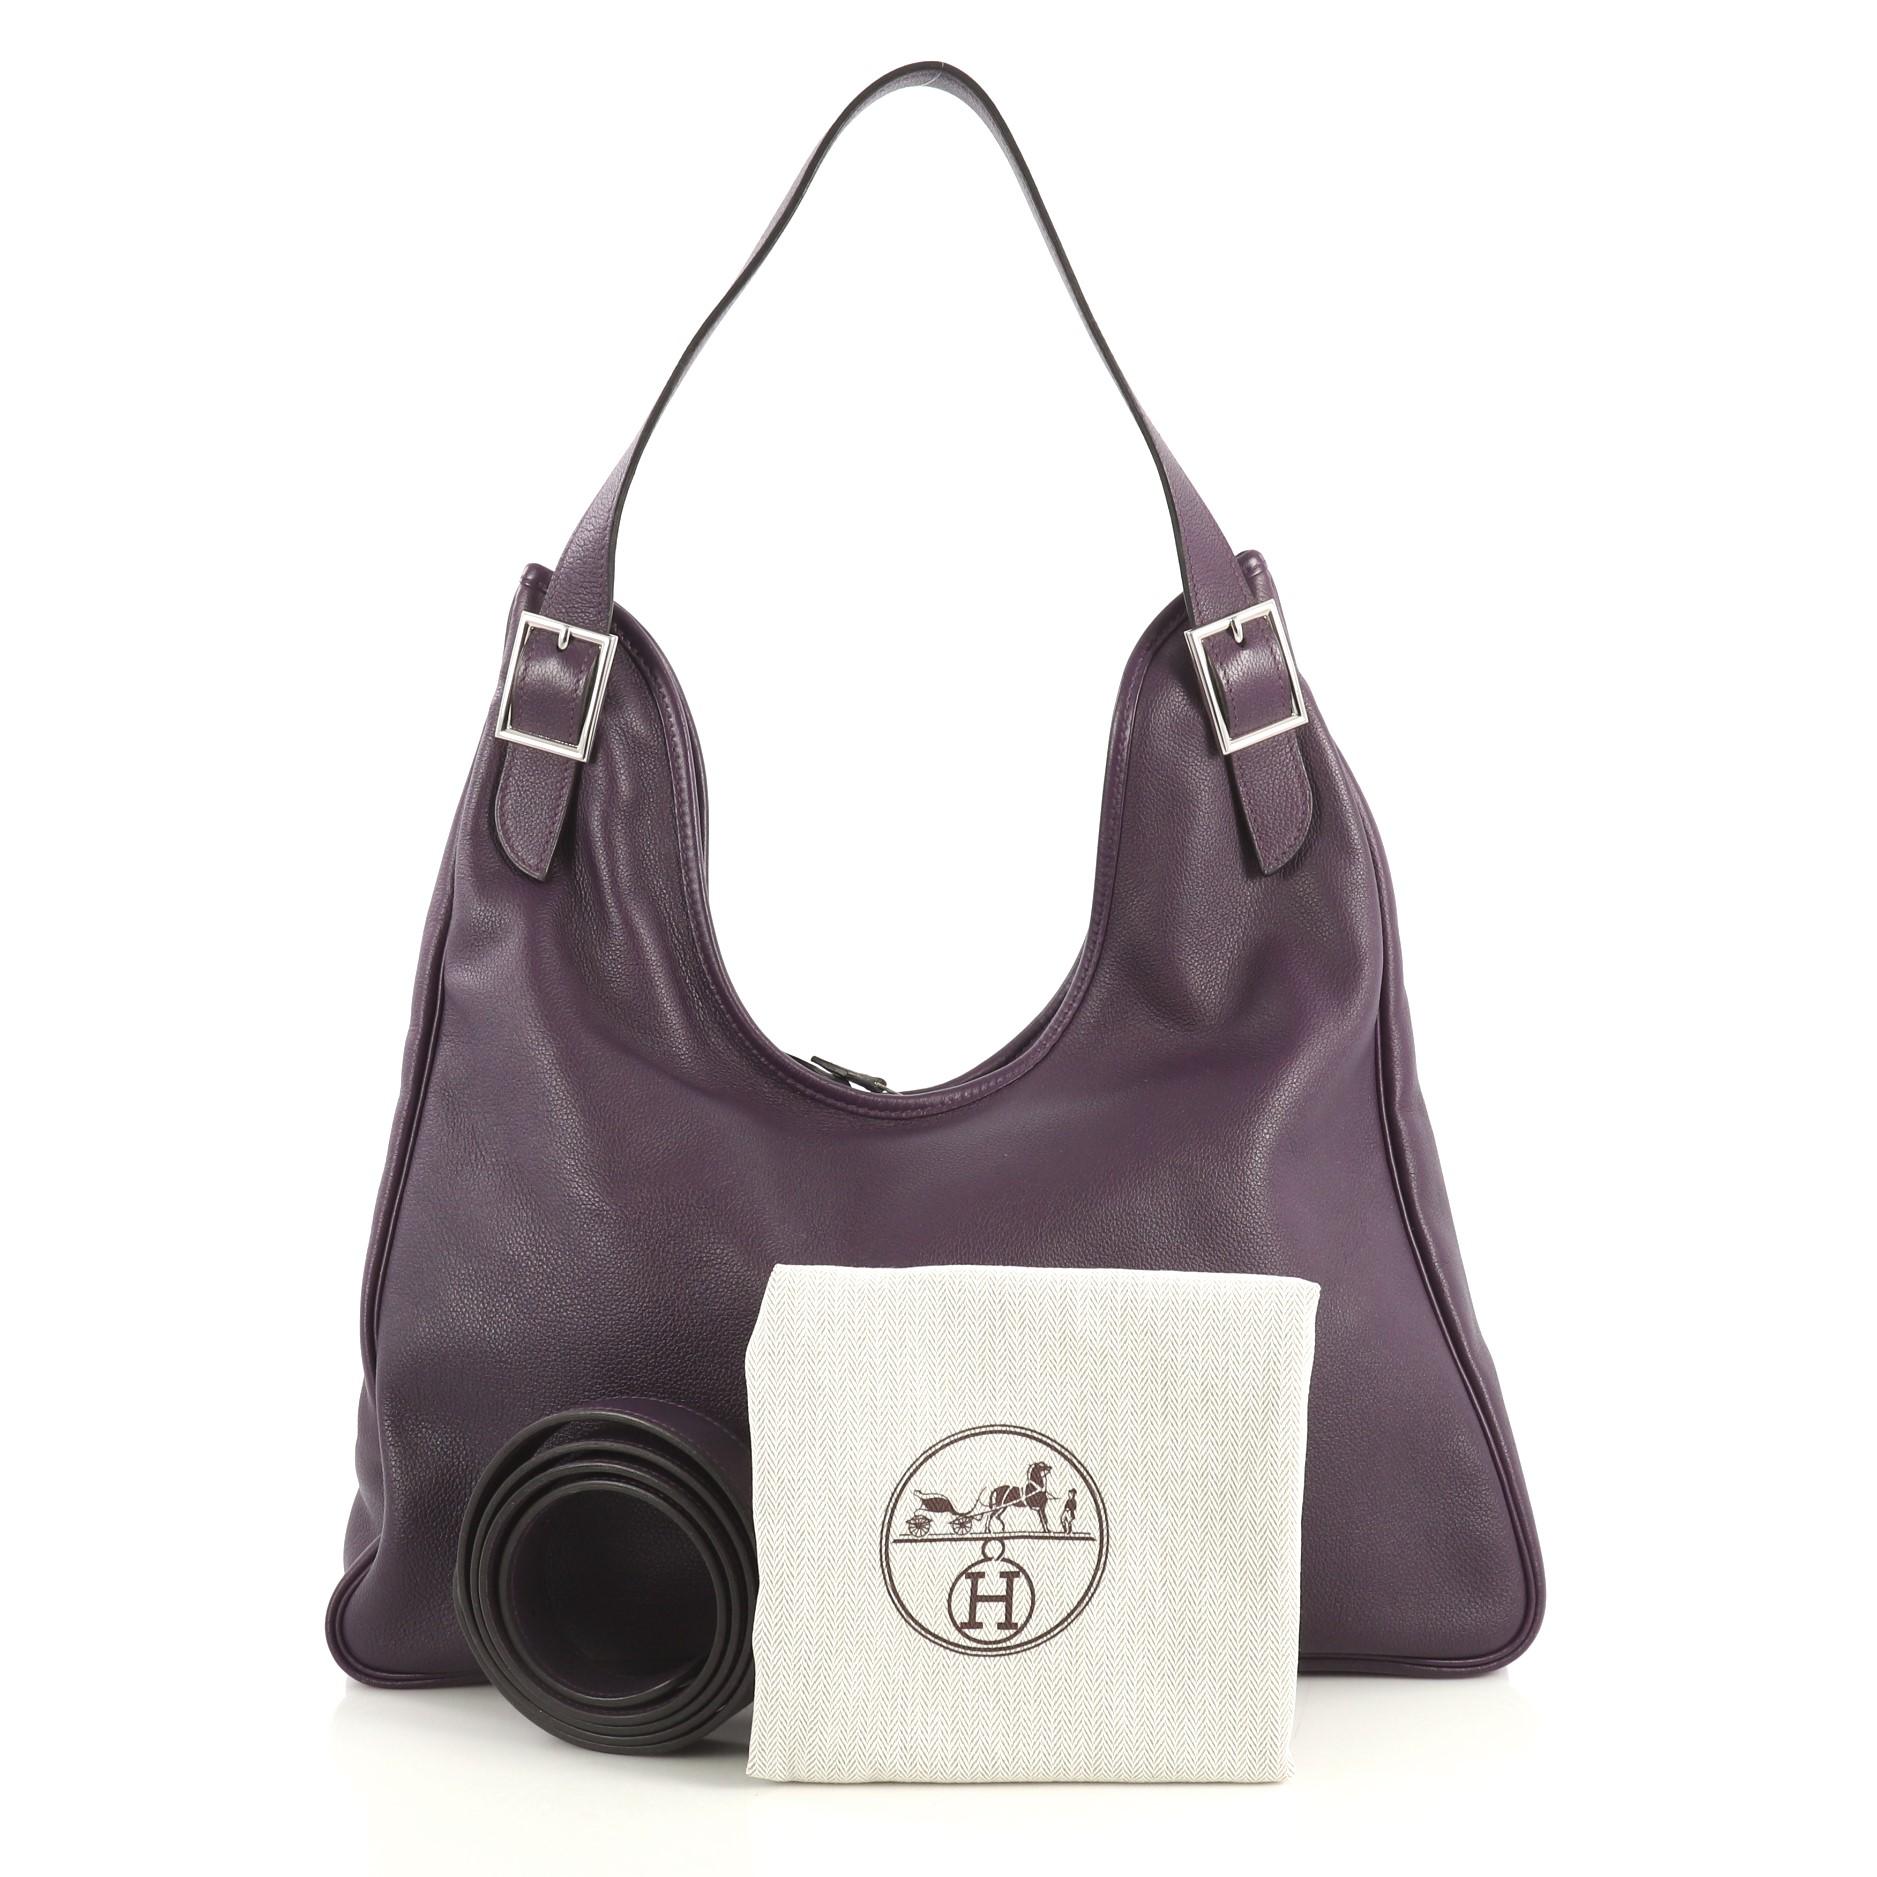 This Hermes Massai Cut Handbag Leather 32, crafted from Violet purple Evergrain leather, features a single looped shoulder strap with buckle details and palladium hardware. Its zip closure opens to an Ecru neutral Toile Chevron interior with side